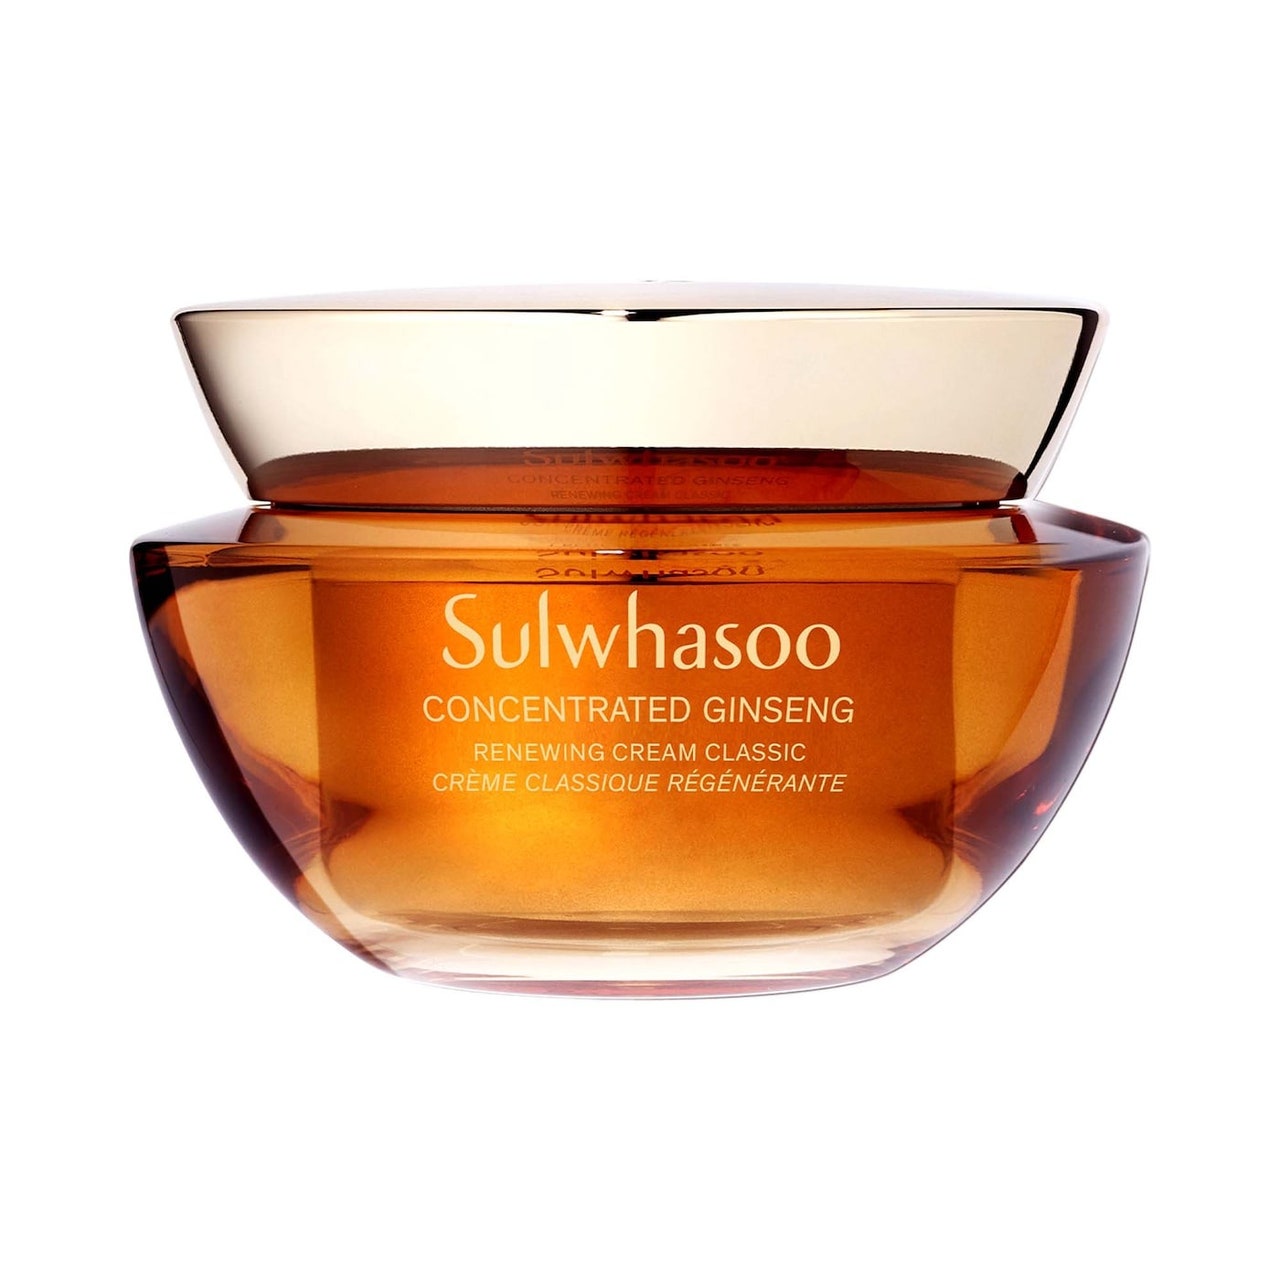 Sulwhasoo Concentrated Ginseng Renewing Cream transparent orange jar with gold lid on white background